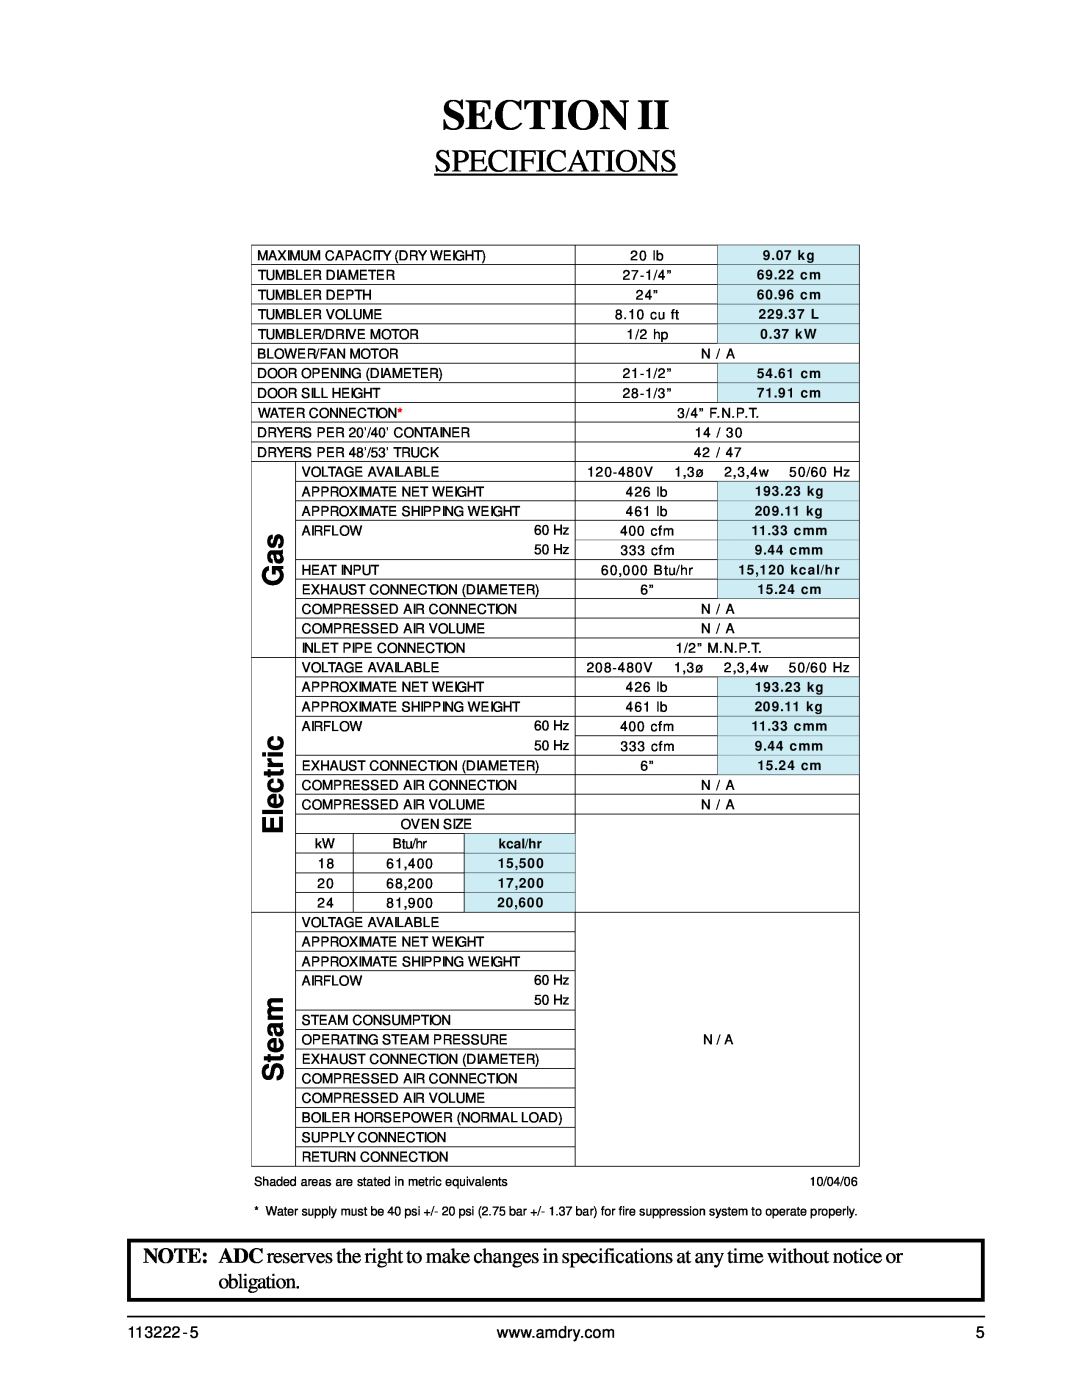 American Dryer Corp AD-24 Phase 7 installation manual Specifications, Section, Steam 